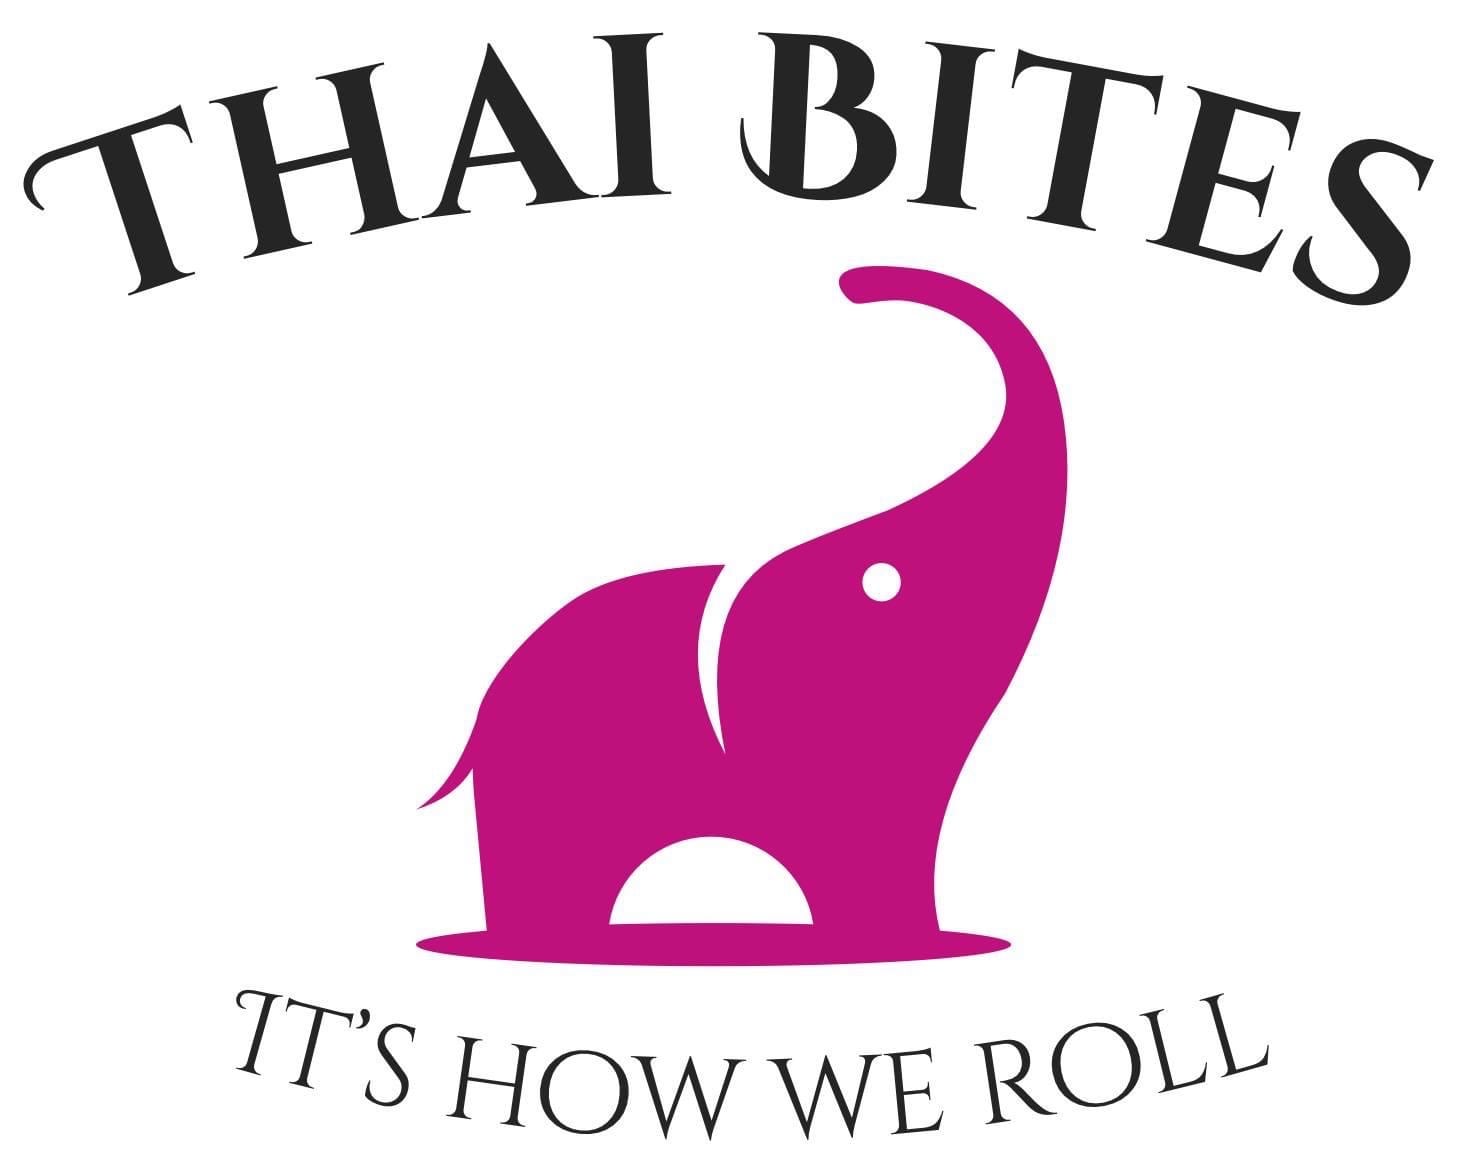 Thai Bites Food Truck logo with "it's how we roll" tagline